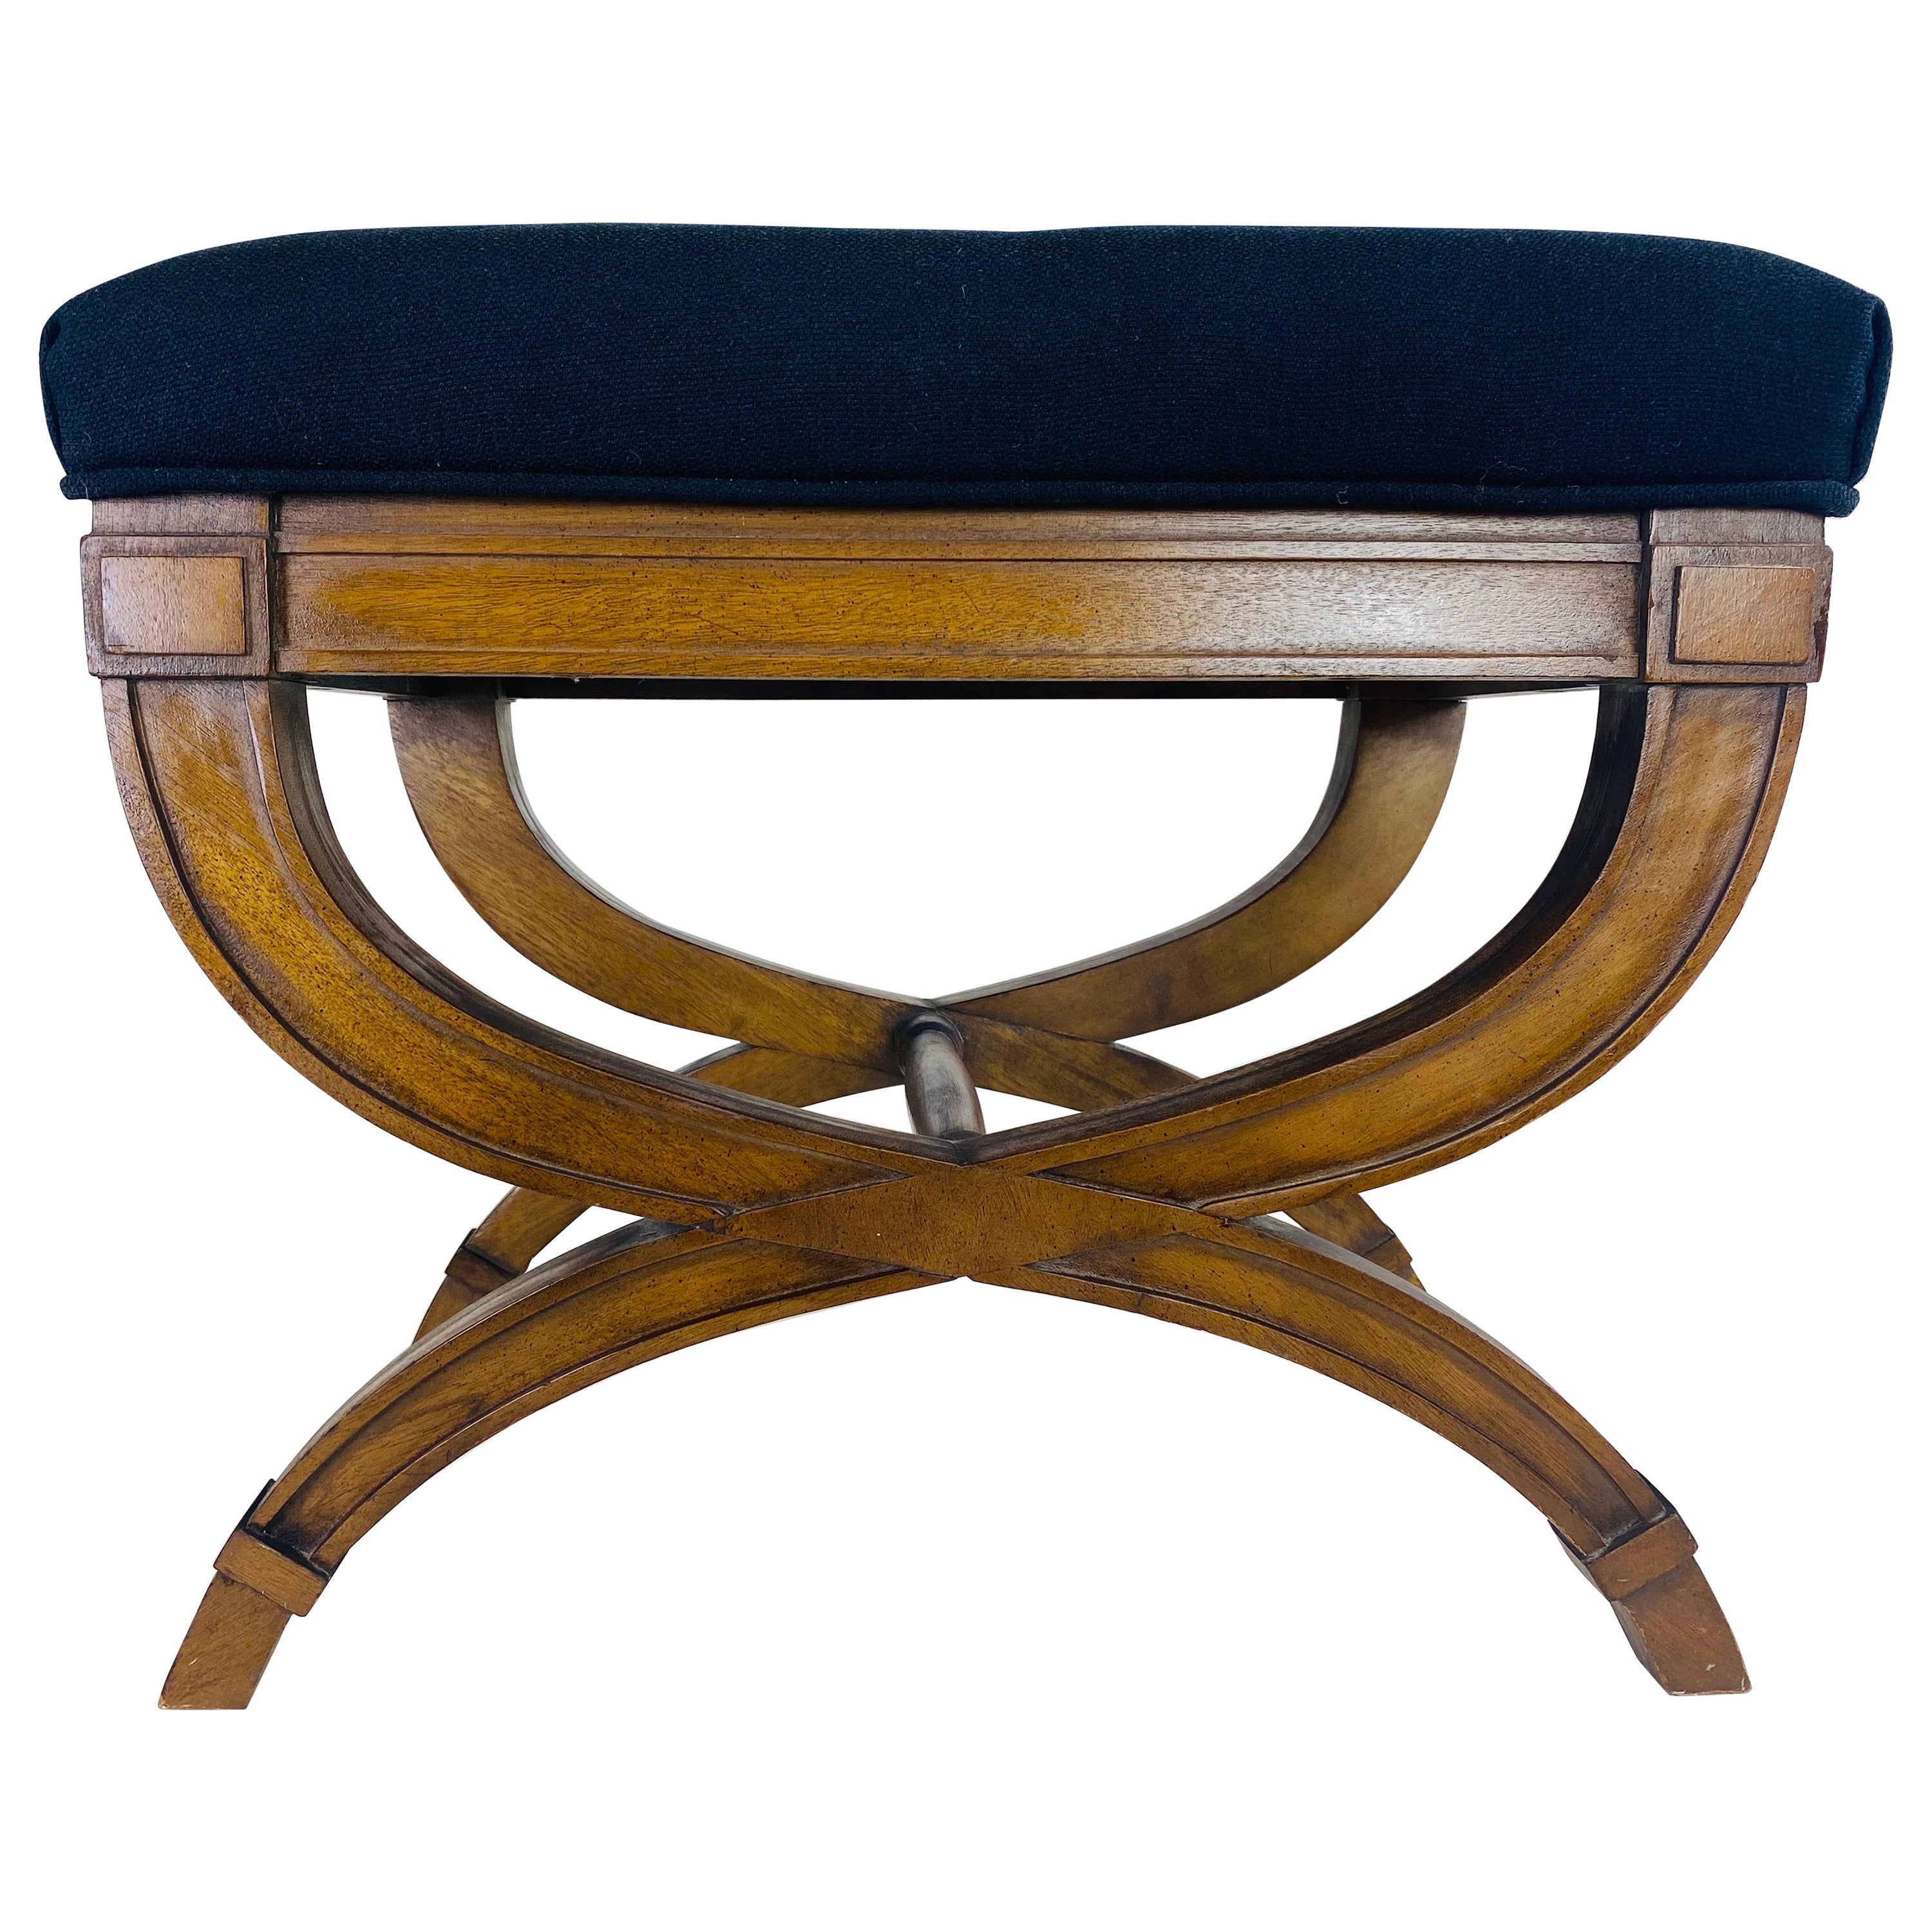 Midcentury Vintage Empire Inspired Newly Upholstered Bench For Sale